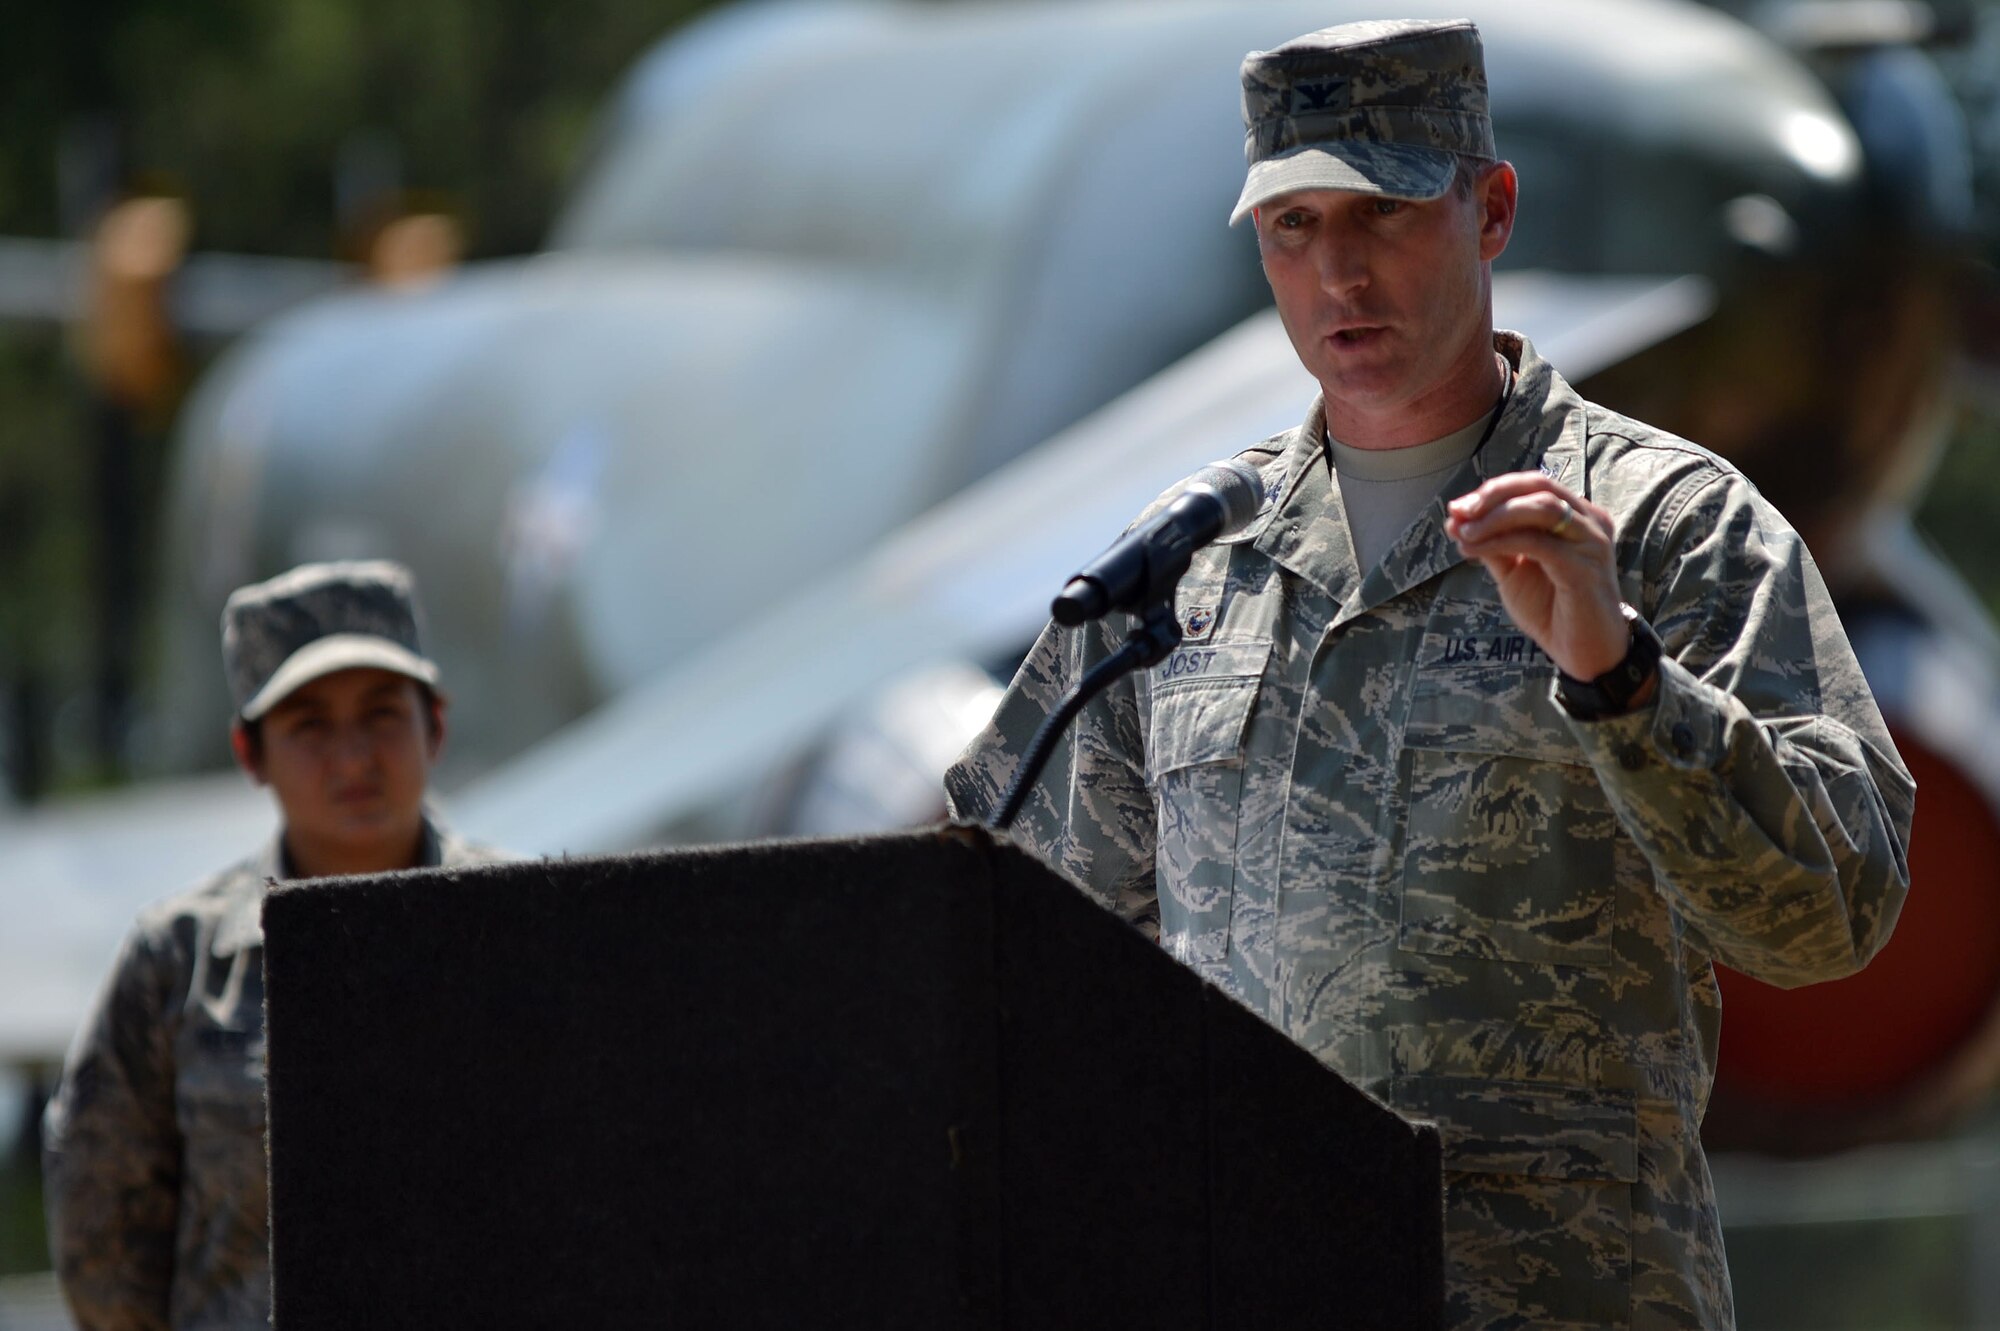 U.S. Air Force Col. Stephen Jost, 20th Fighter Wing commander, addresses members of Team Shaw and the local community during a road naming ceremony near the Sumter Gate at Shaw Air Force Base, S.C., July 14, 2016. In attendance was George Bowman, son of 1st Lt. Leroy Bowman, who the street was being named after. Bowman thanked everyone for their support and the honor of having a street named after his father. (U.S. Air Force photo by Senior Airman Michael Cossaboom)